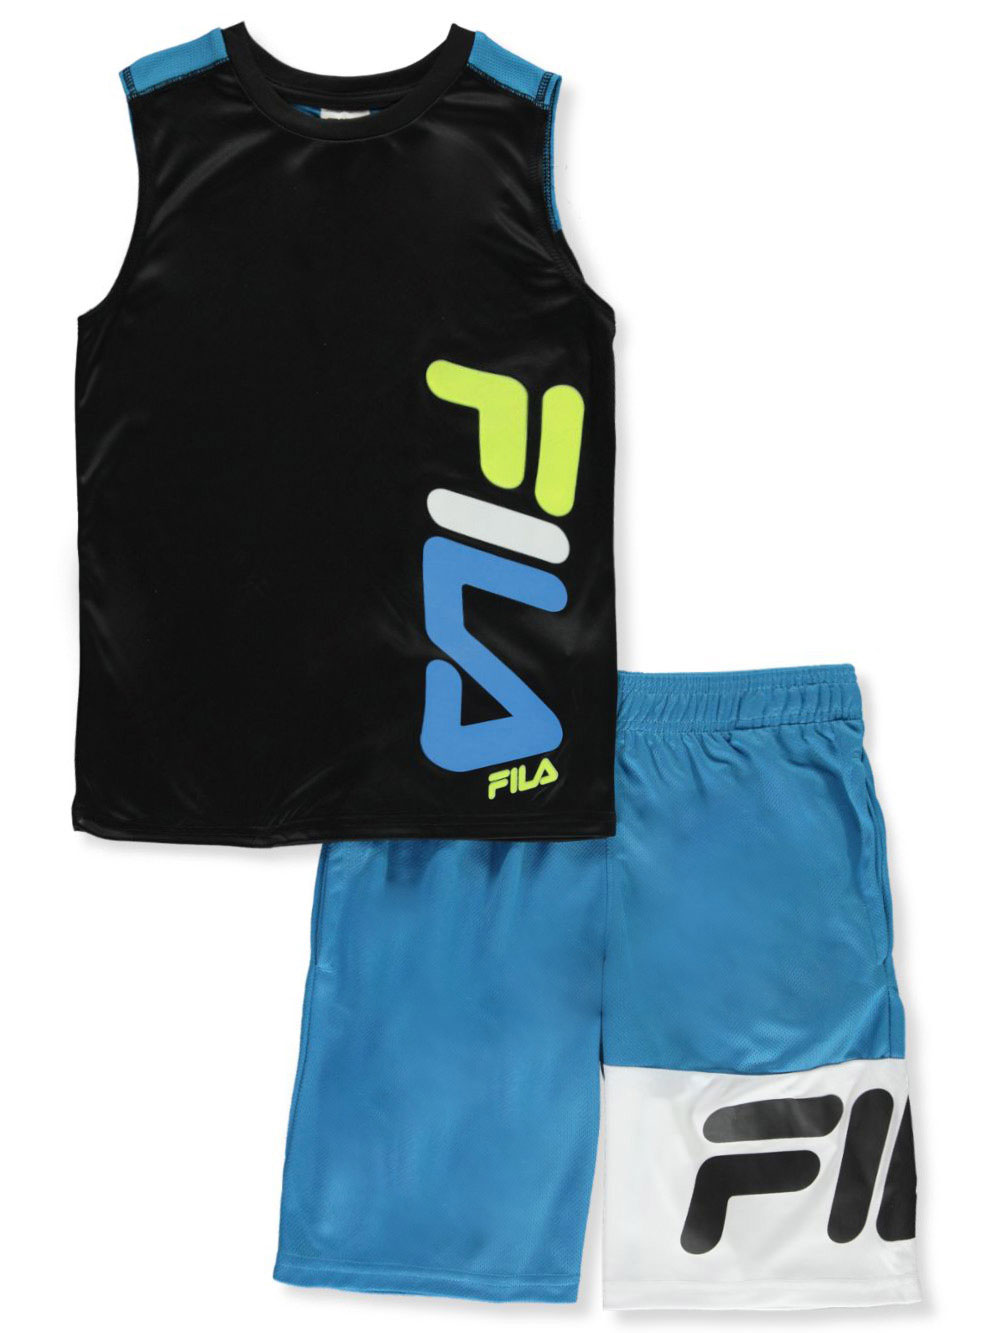 fila one piece outfit